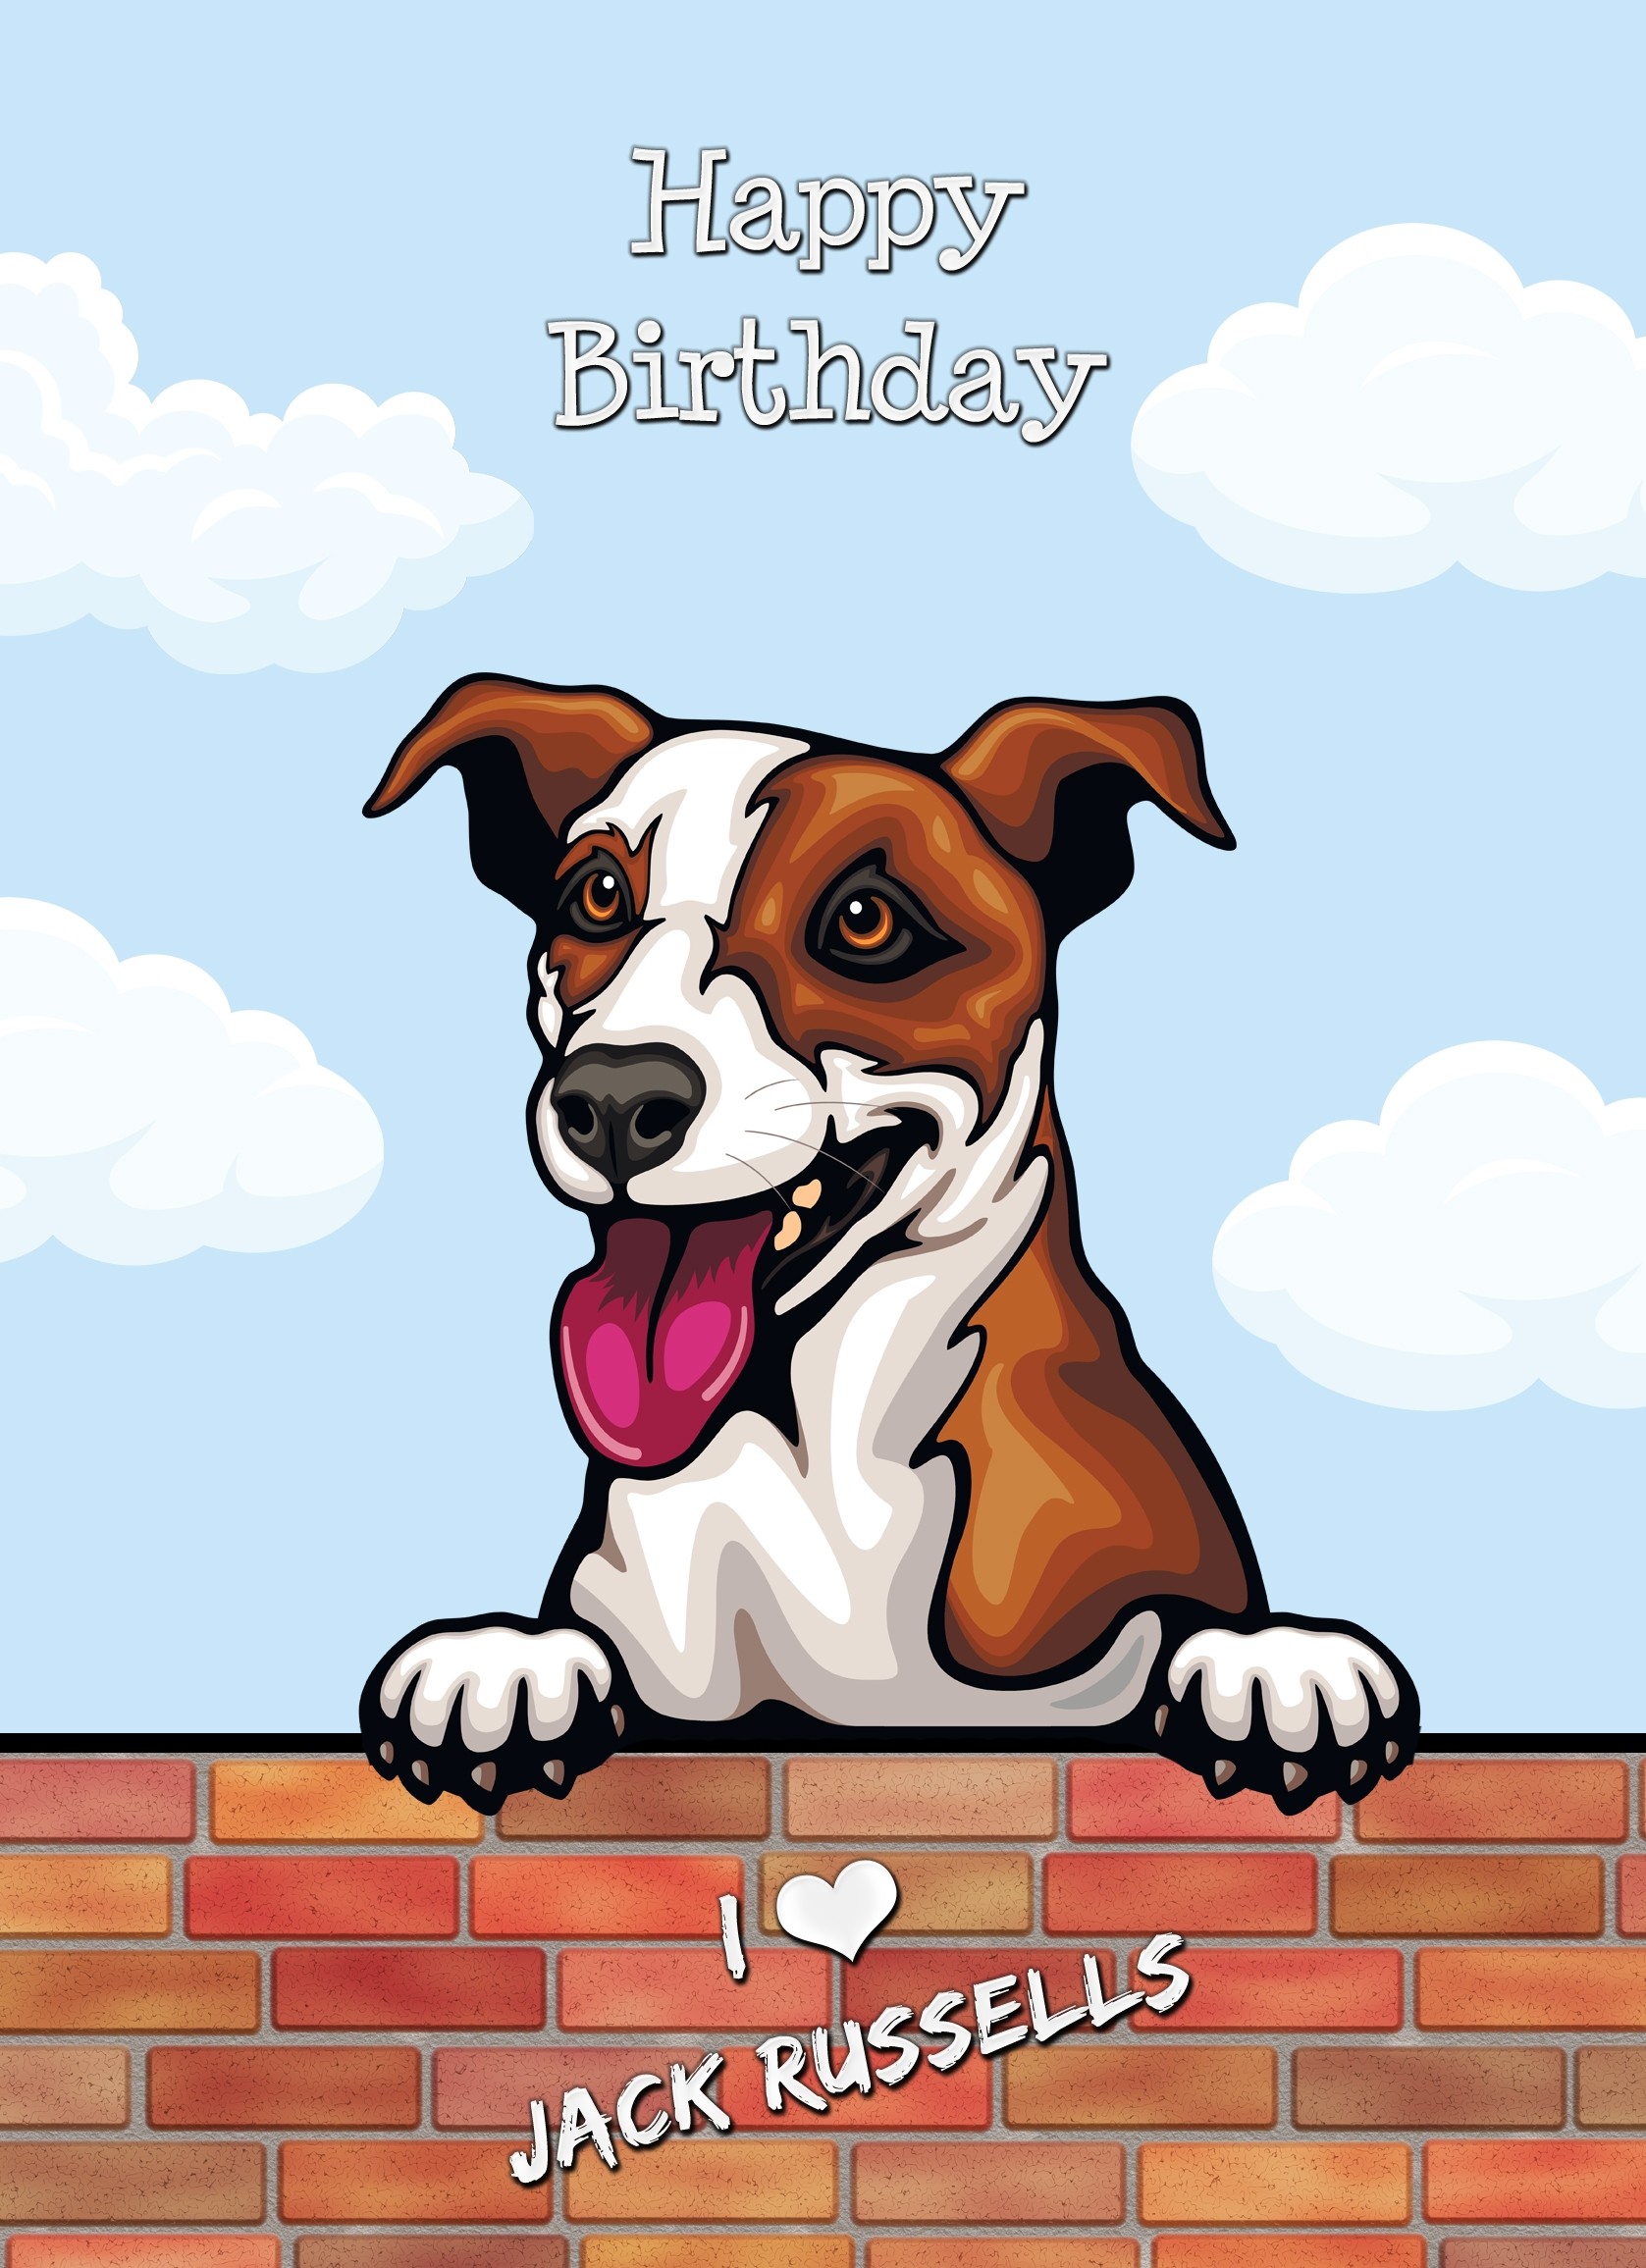 Jack Russell Dog Birthday Card (Art, Clouds)